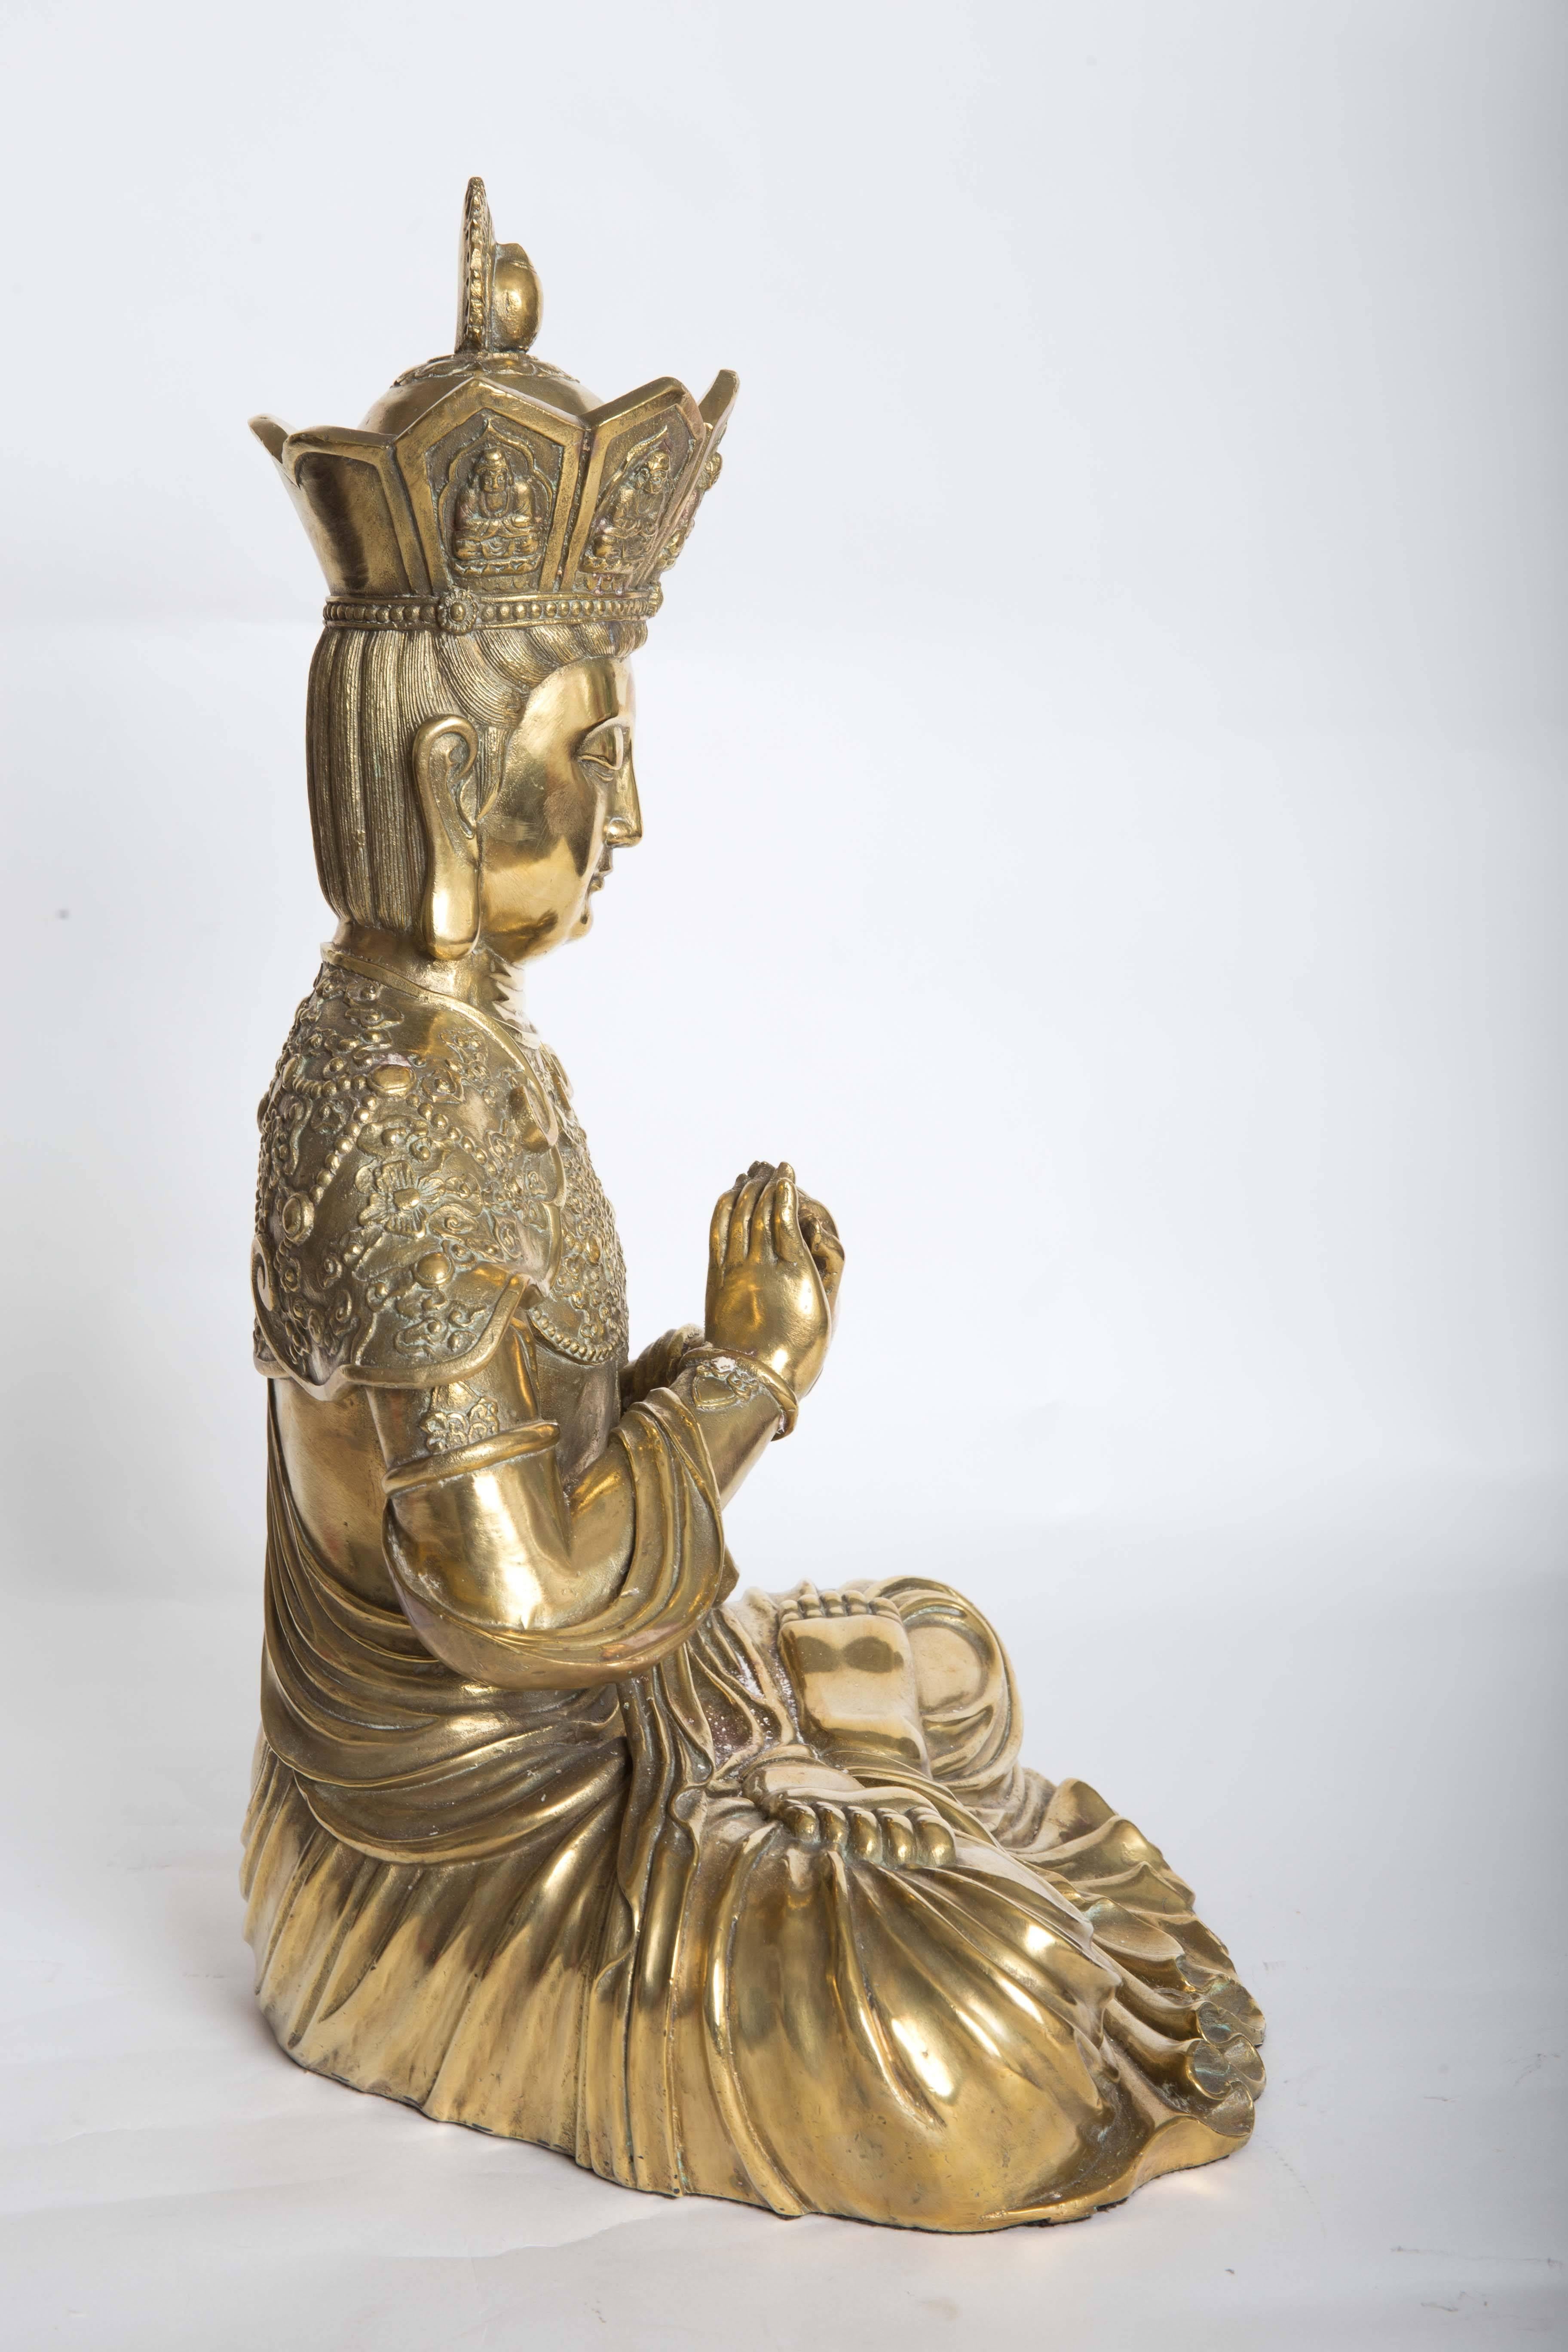 Intricately Etched Bronze Sculpture of a Seated Diety Figure 2